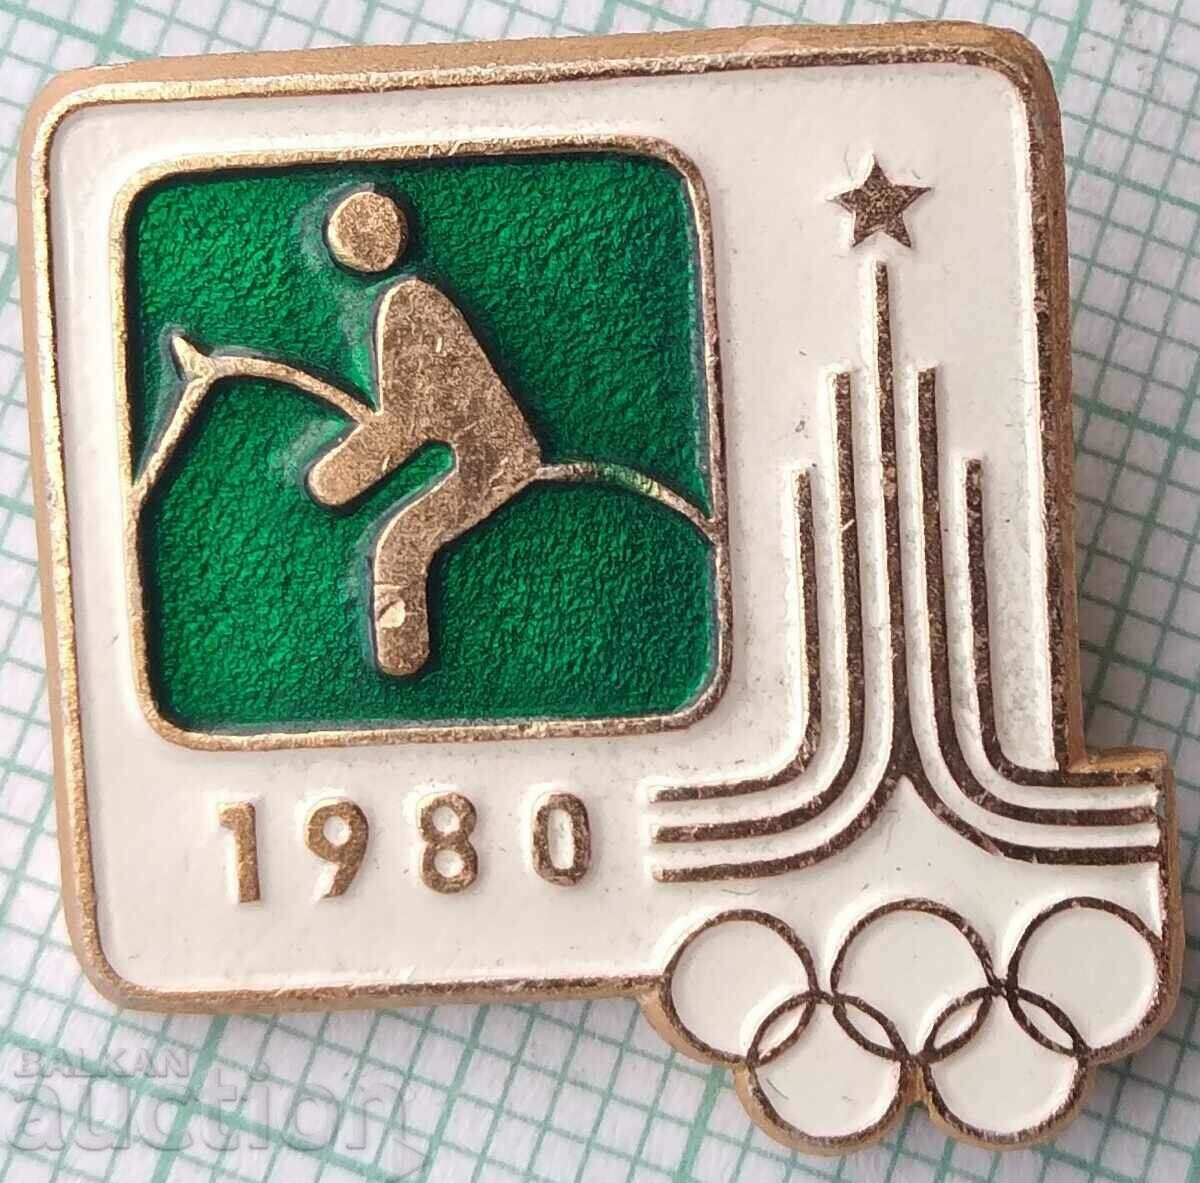 13240 Badge - Olympics Moscow 1980